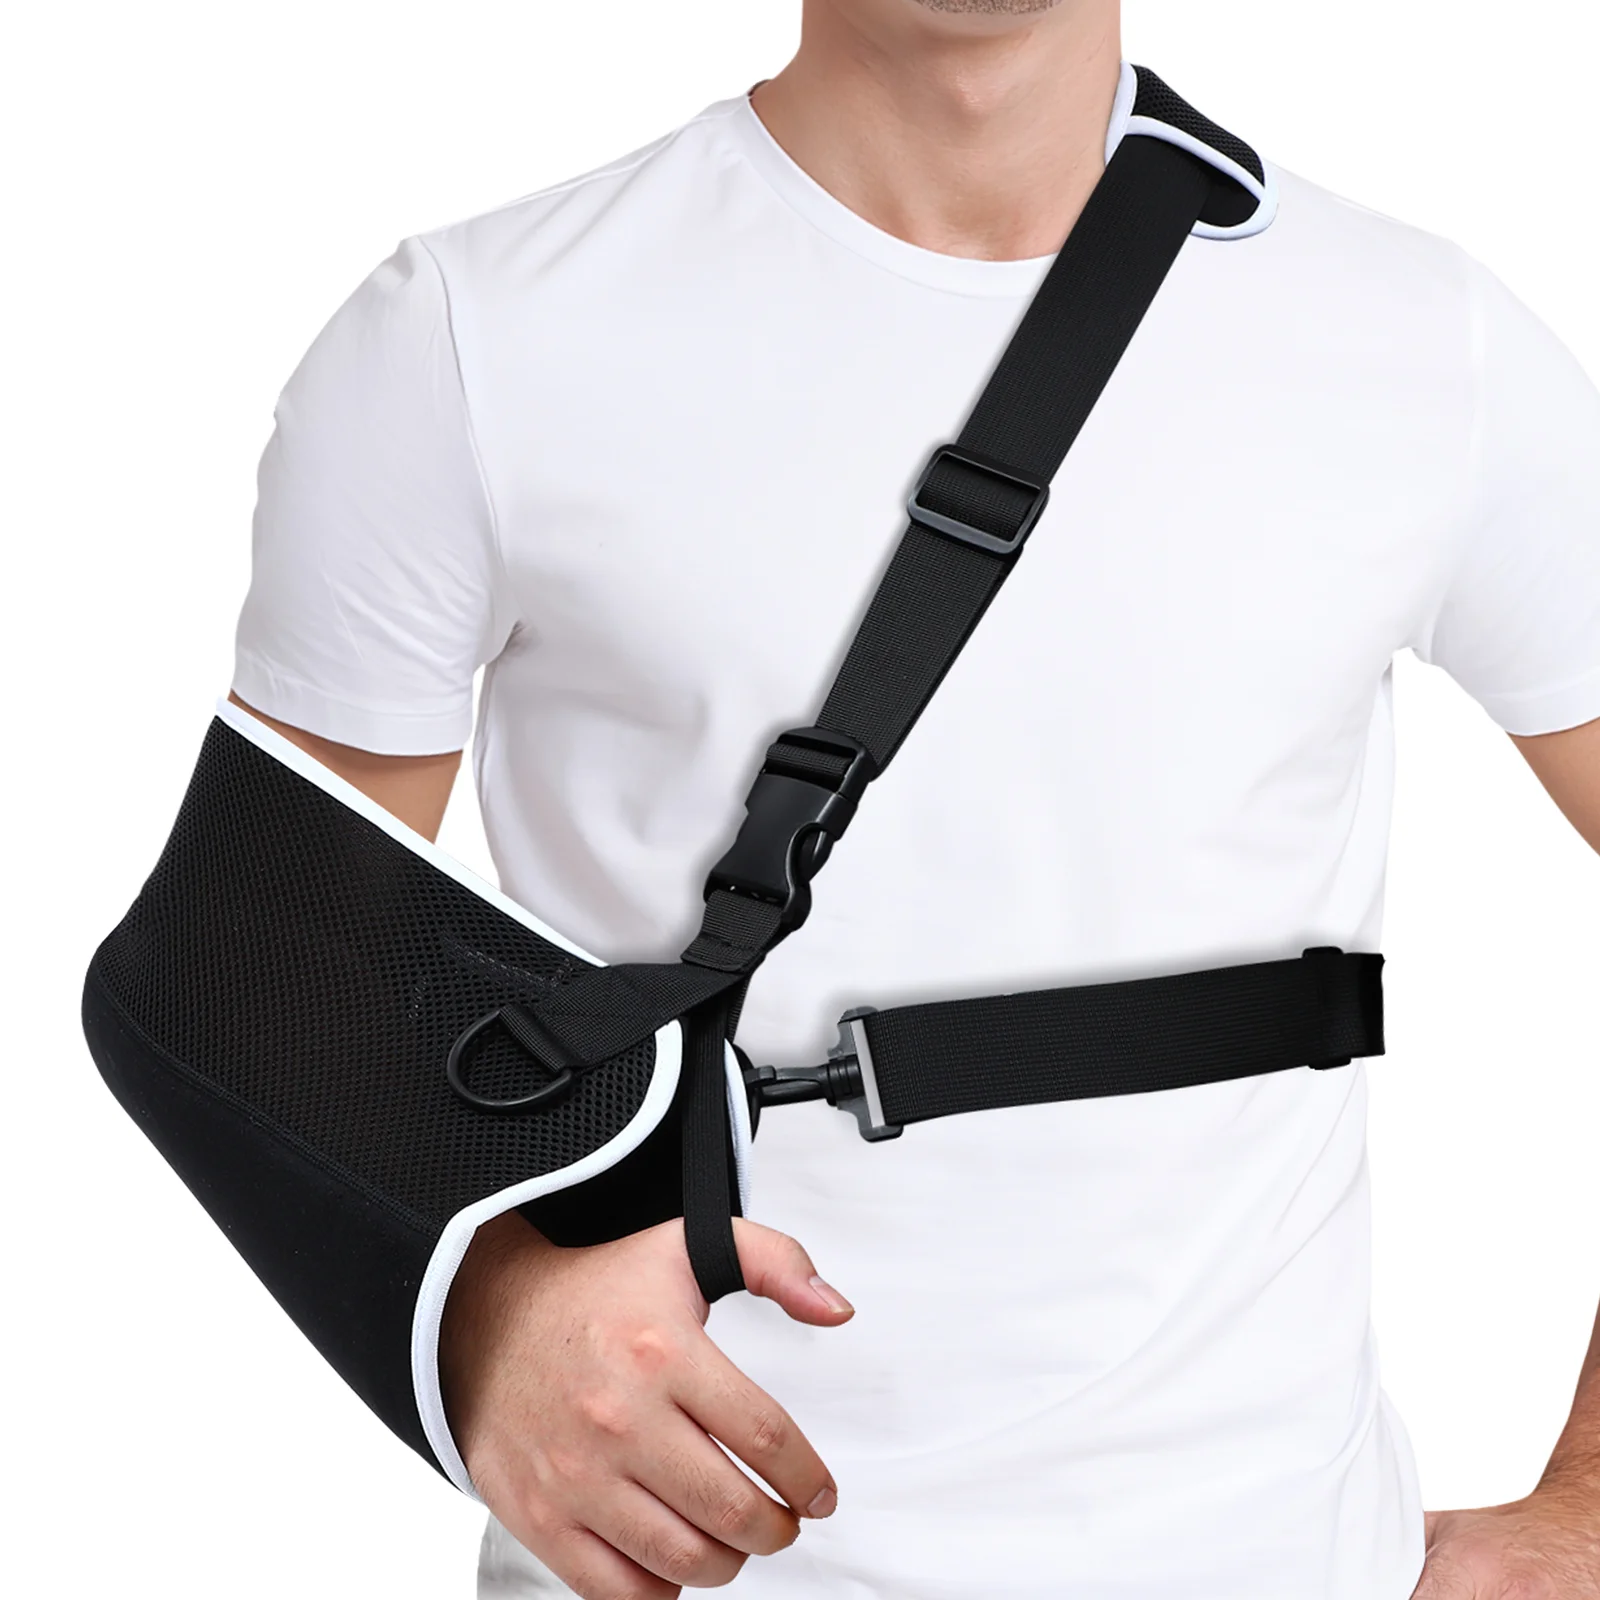 

Healifty Arm Sling Rotator Cuff Support Shoulder Immobilizer Wrist Injury Brace Elbow Injury Left and Right Arm Sling Shield